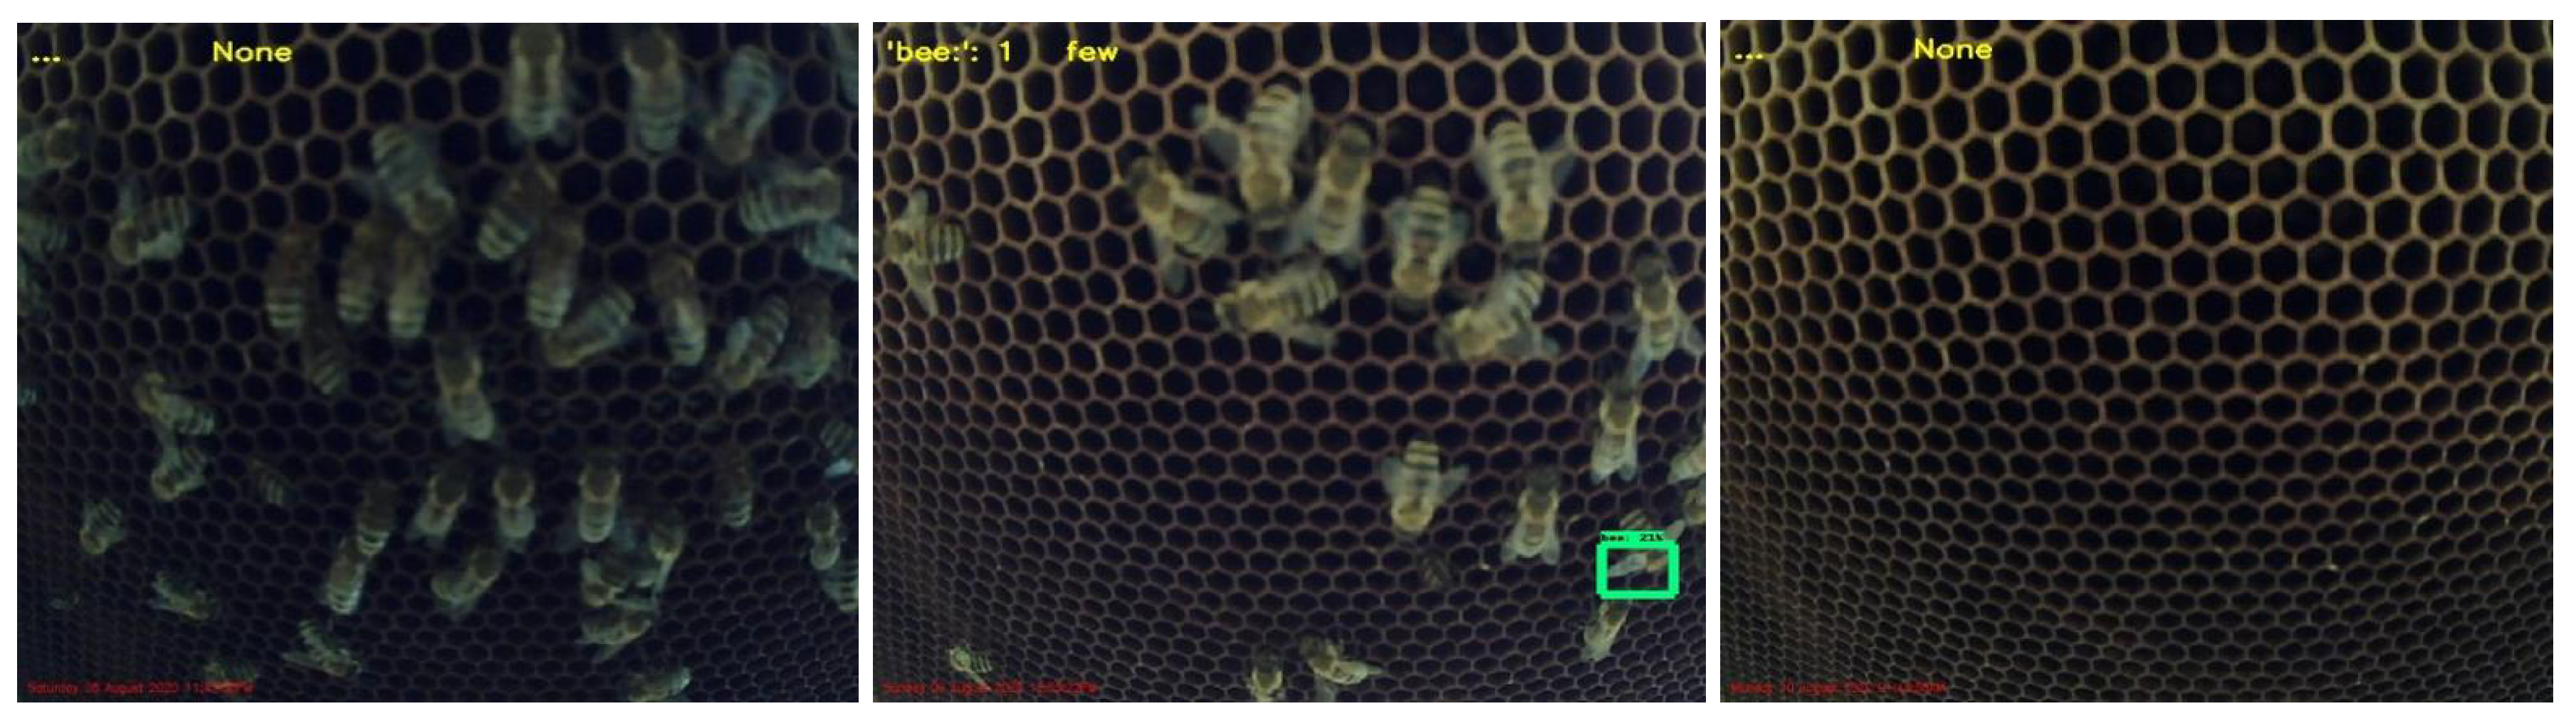 New Bee Sniffing Technology Can Detect Many Dangerous Vapors At Once